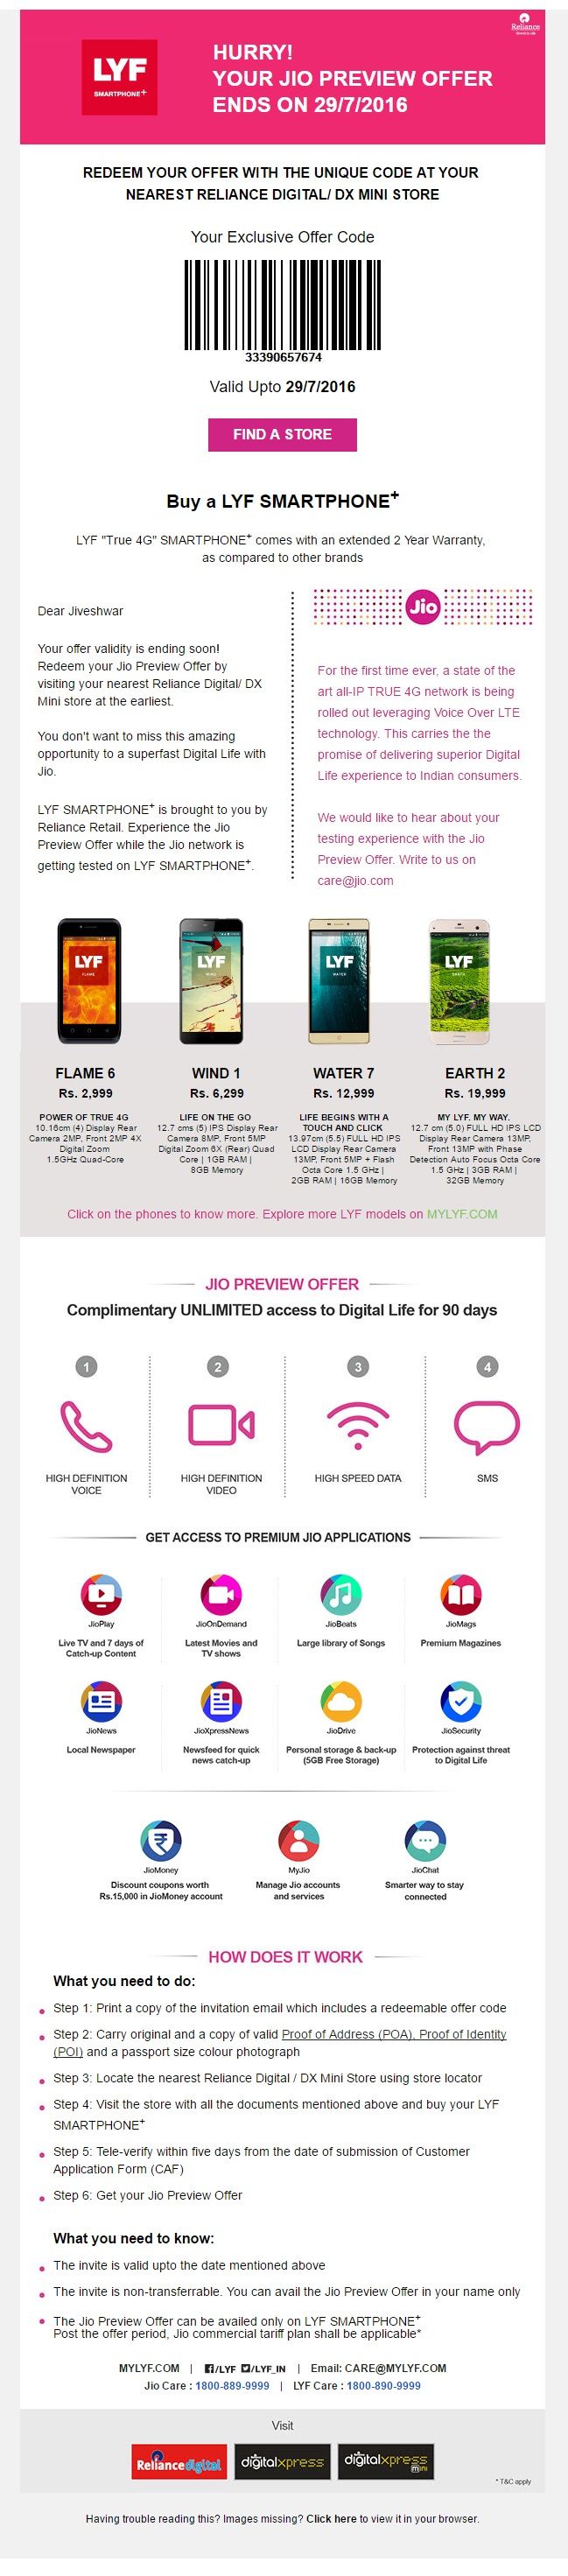 Reliance Jio LYF Mobile Phone Preview Offer